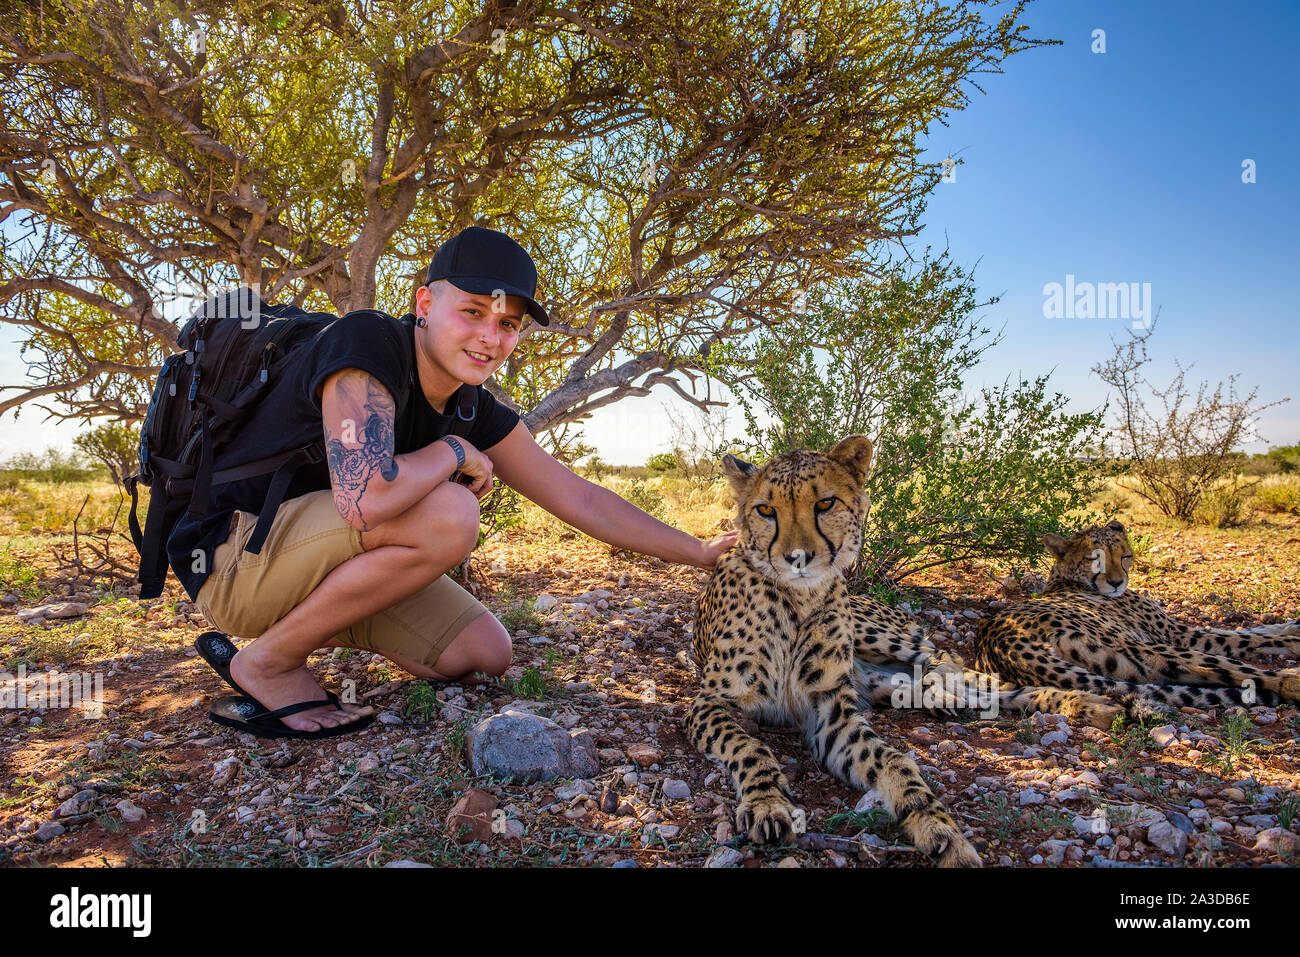 Tourist plays with two cheetahs Stock Photo